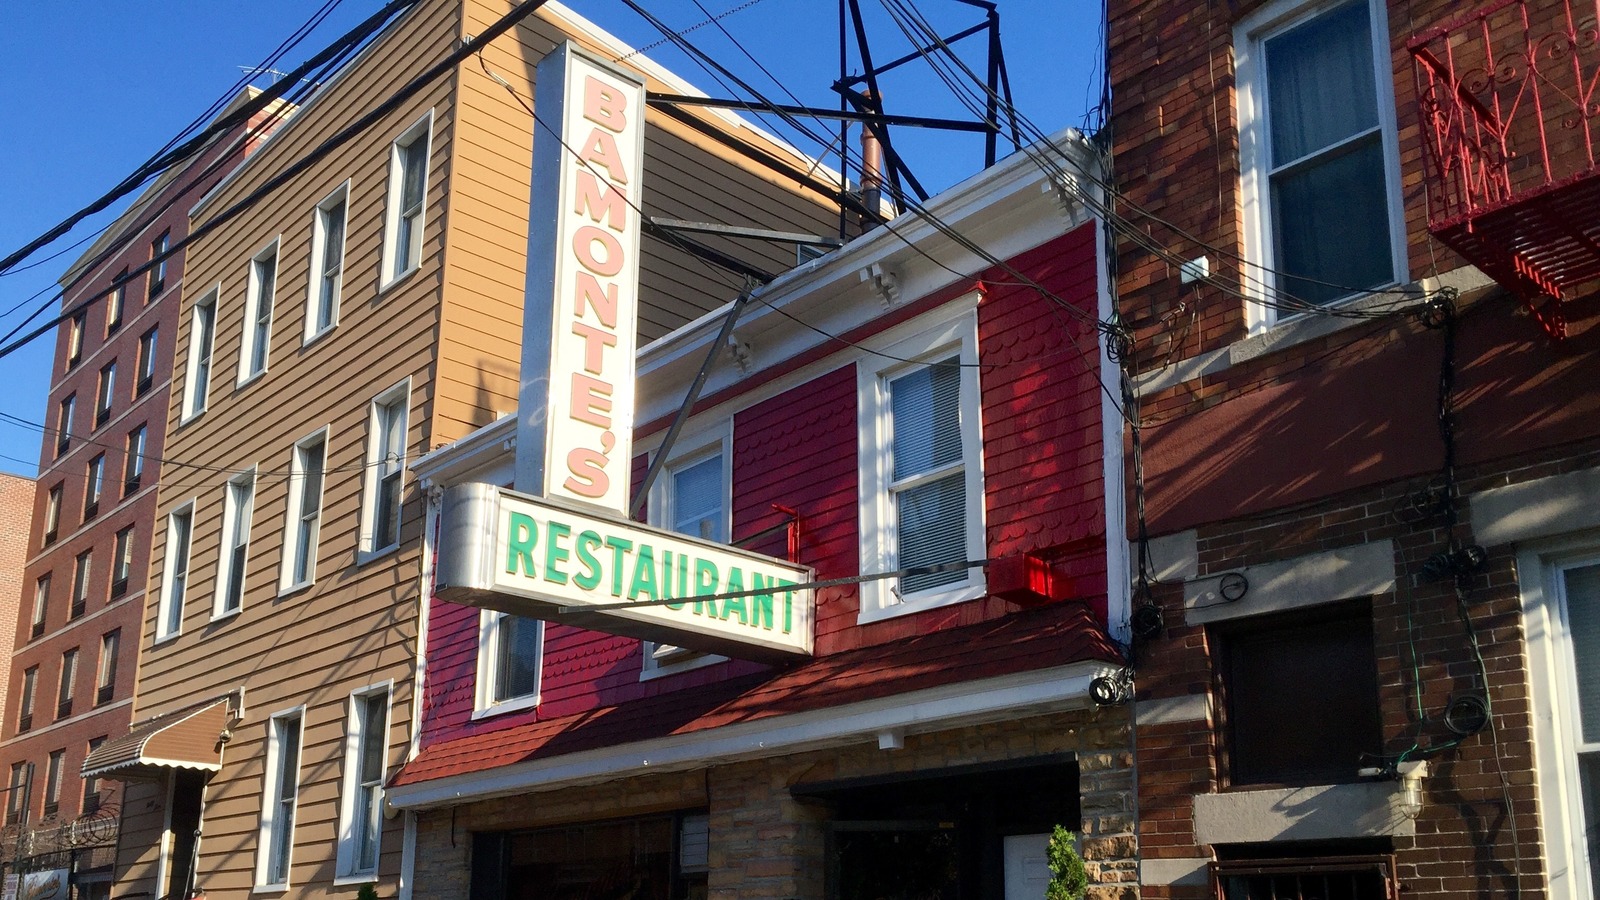 Bamonte's, Brooklyn's Oldest Italian Restaurant, Has Historic Ties To The Mob